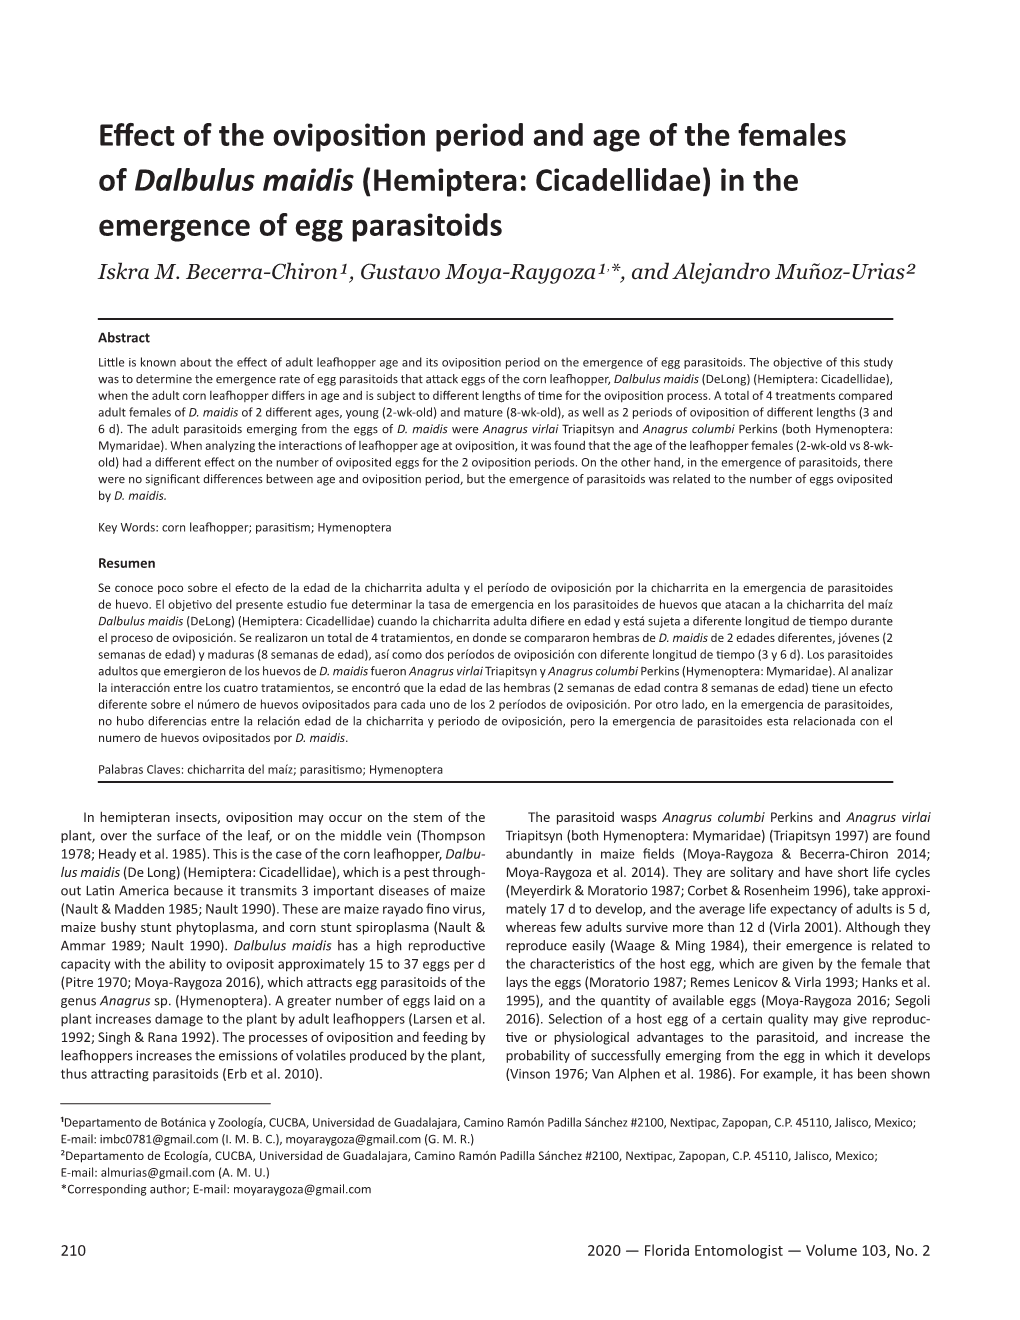 Effect of the Oviposition Period and Age of the Females of Dalbulus Maidis (Hemiptera: Cicadellidae) in the Emergence of Egg Parasitoids